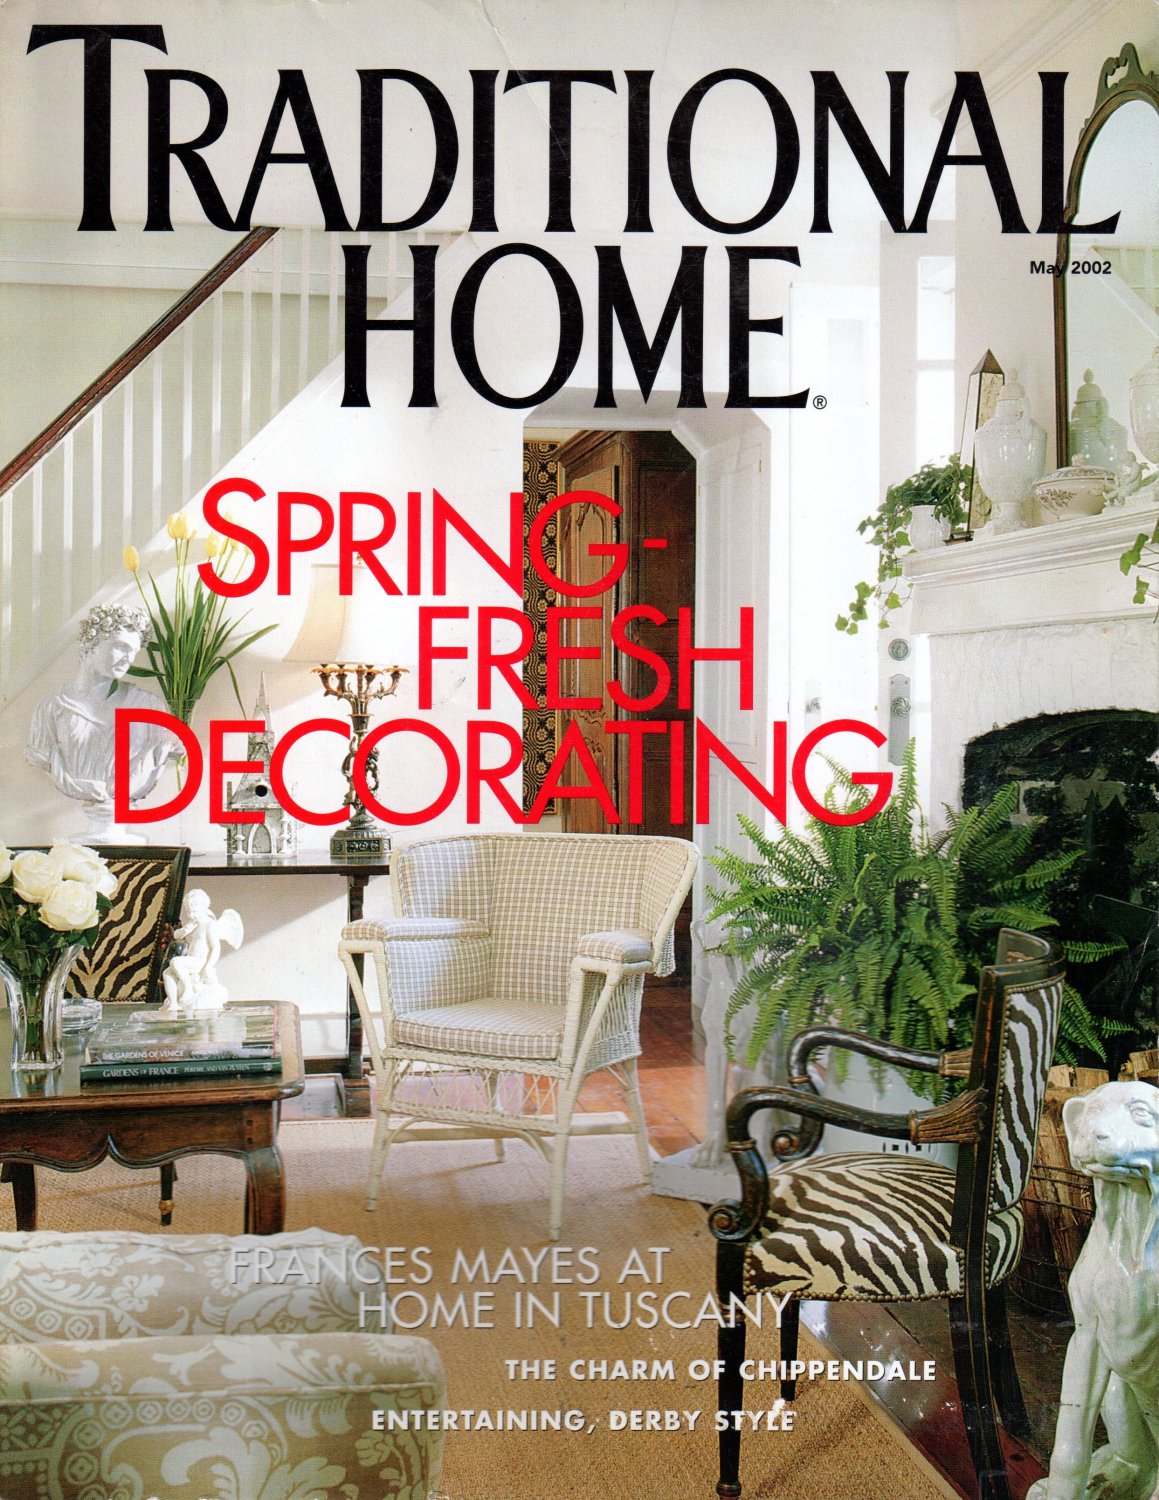  Traditional Home Magazine May 2002 Back Issue